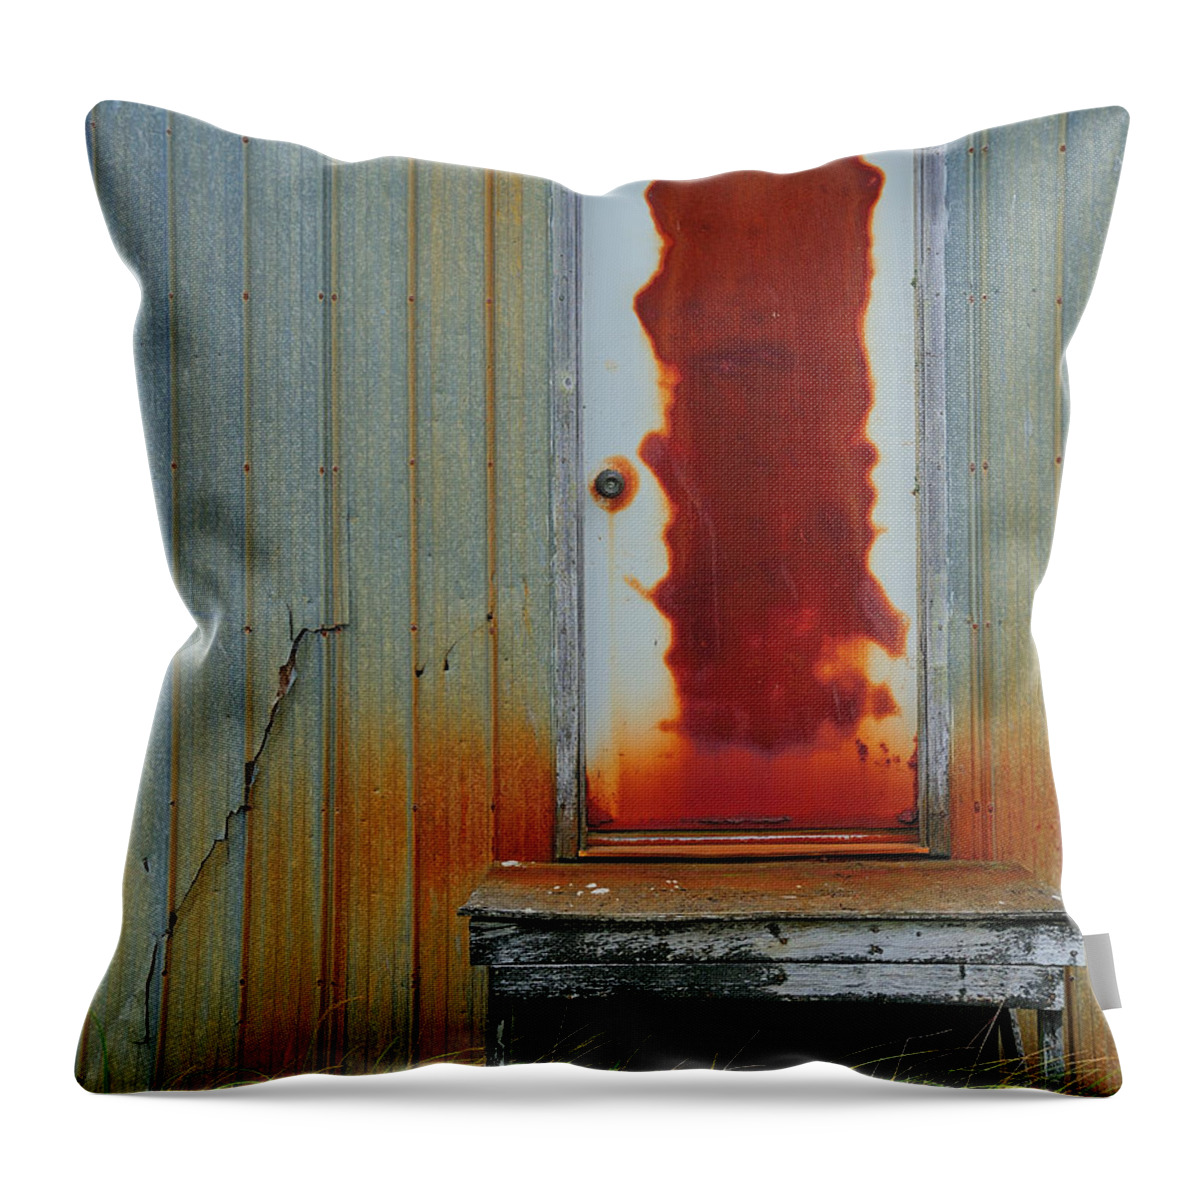 Rust Throw Pillow featuring the photograph Rusty Door by Tony Beck